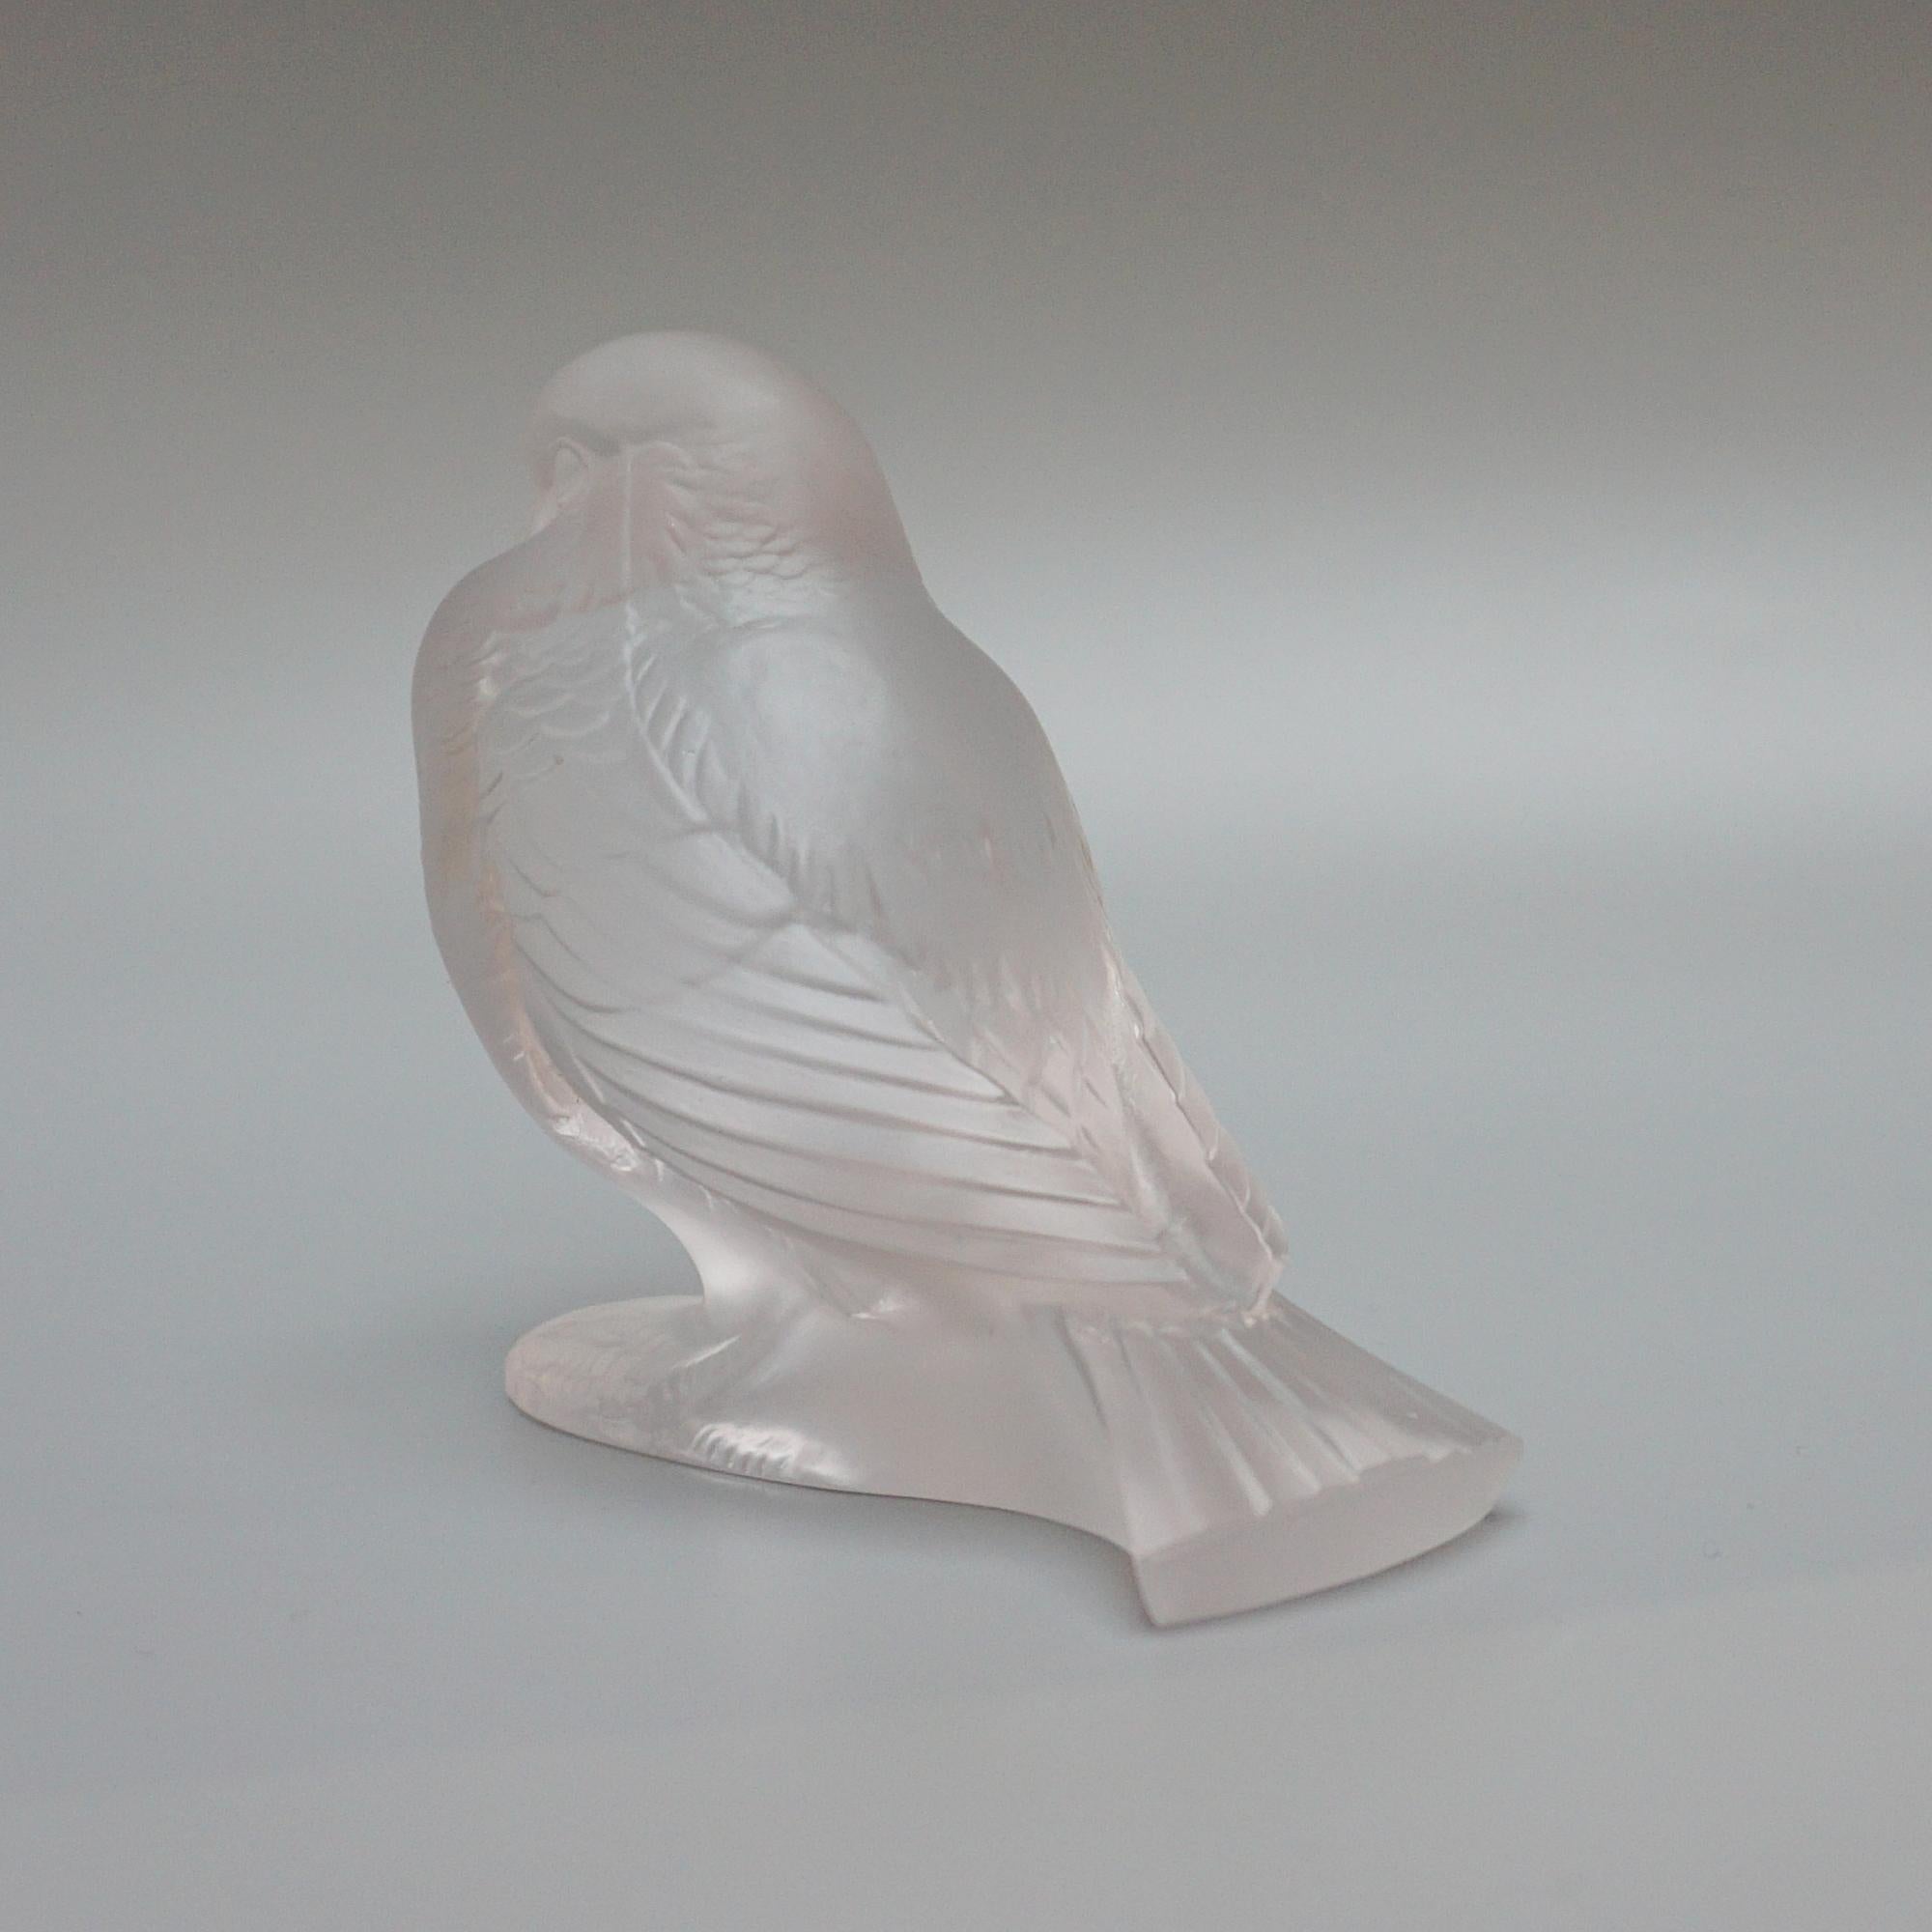 French 'Moineau Fier' Rene Lalique Glass Paperweight  For Sale